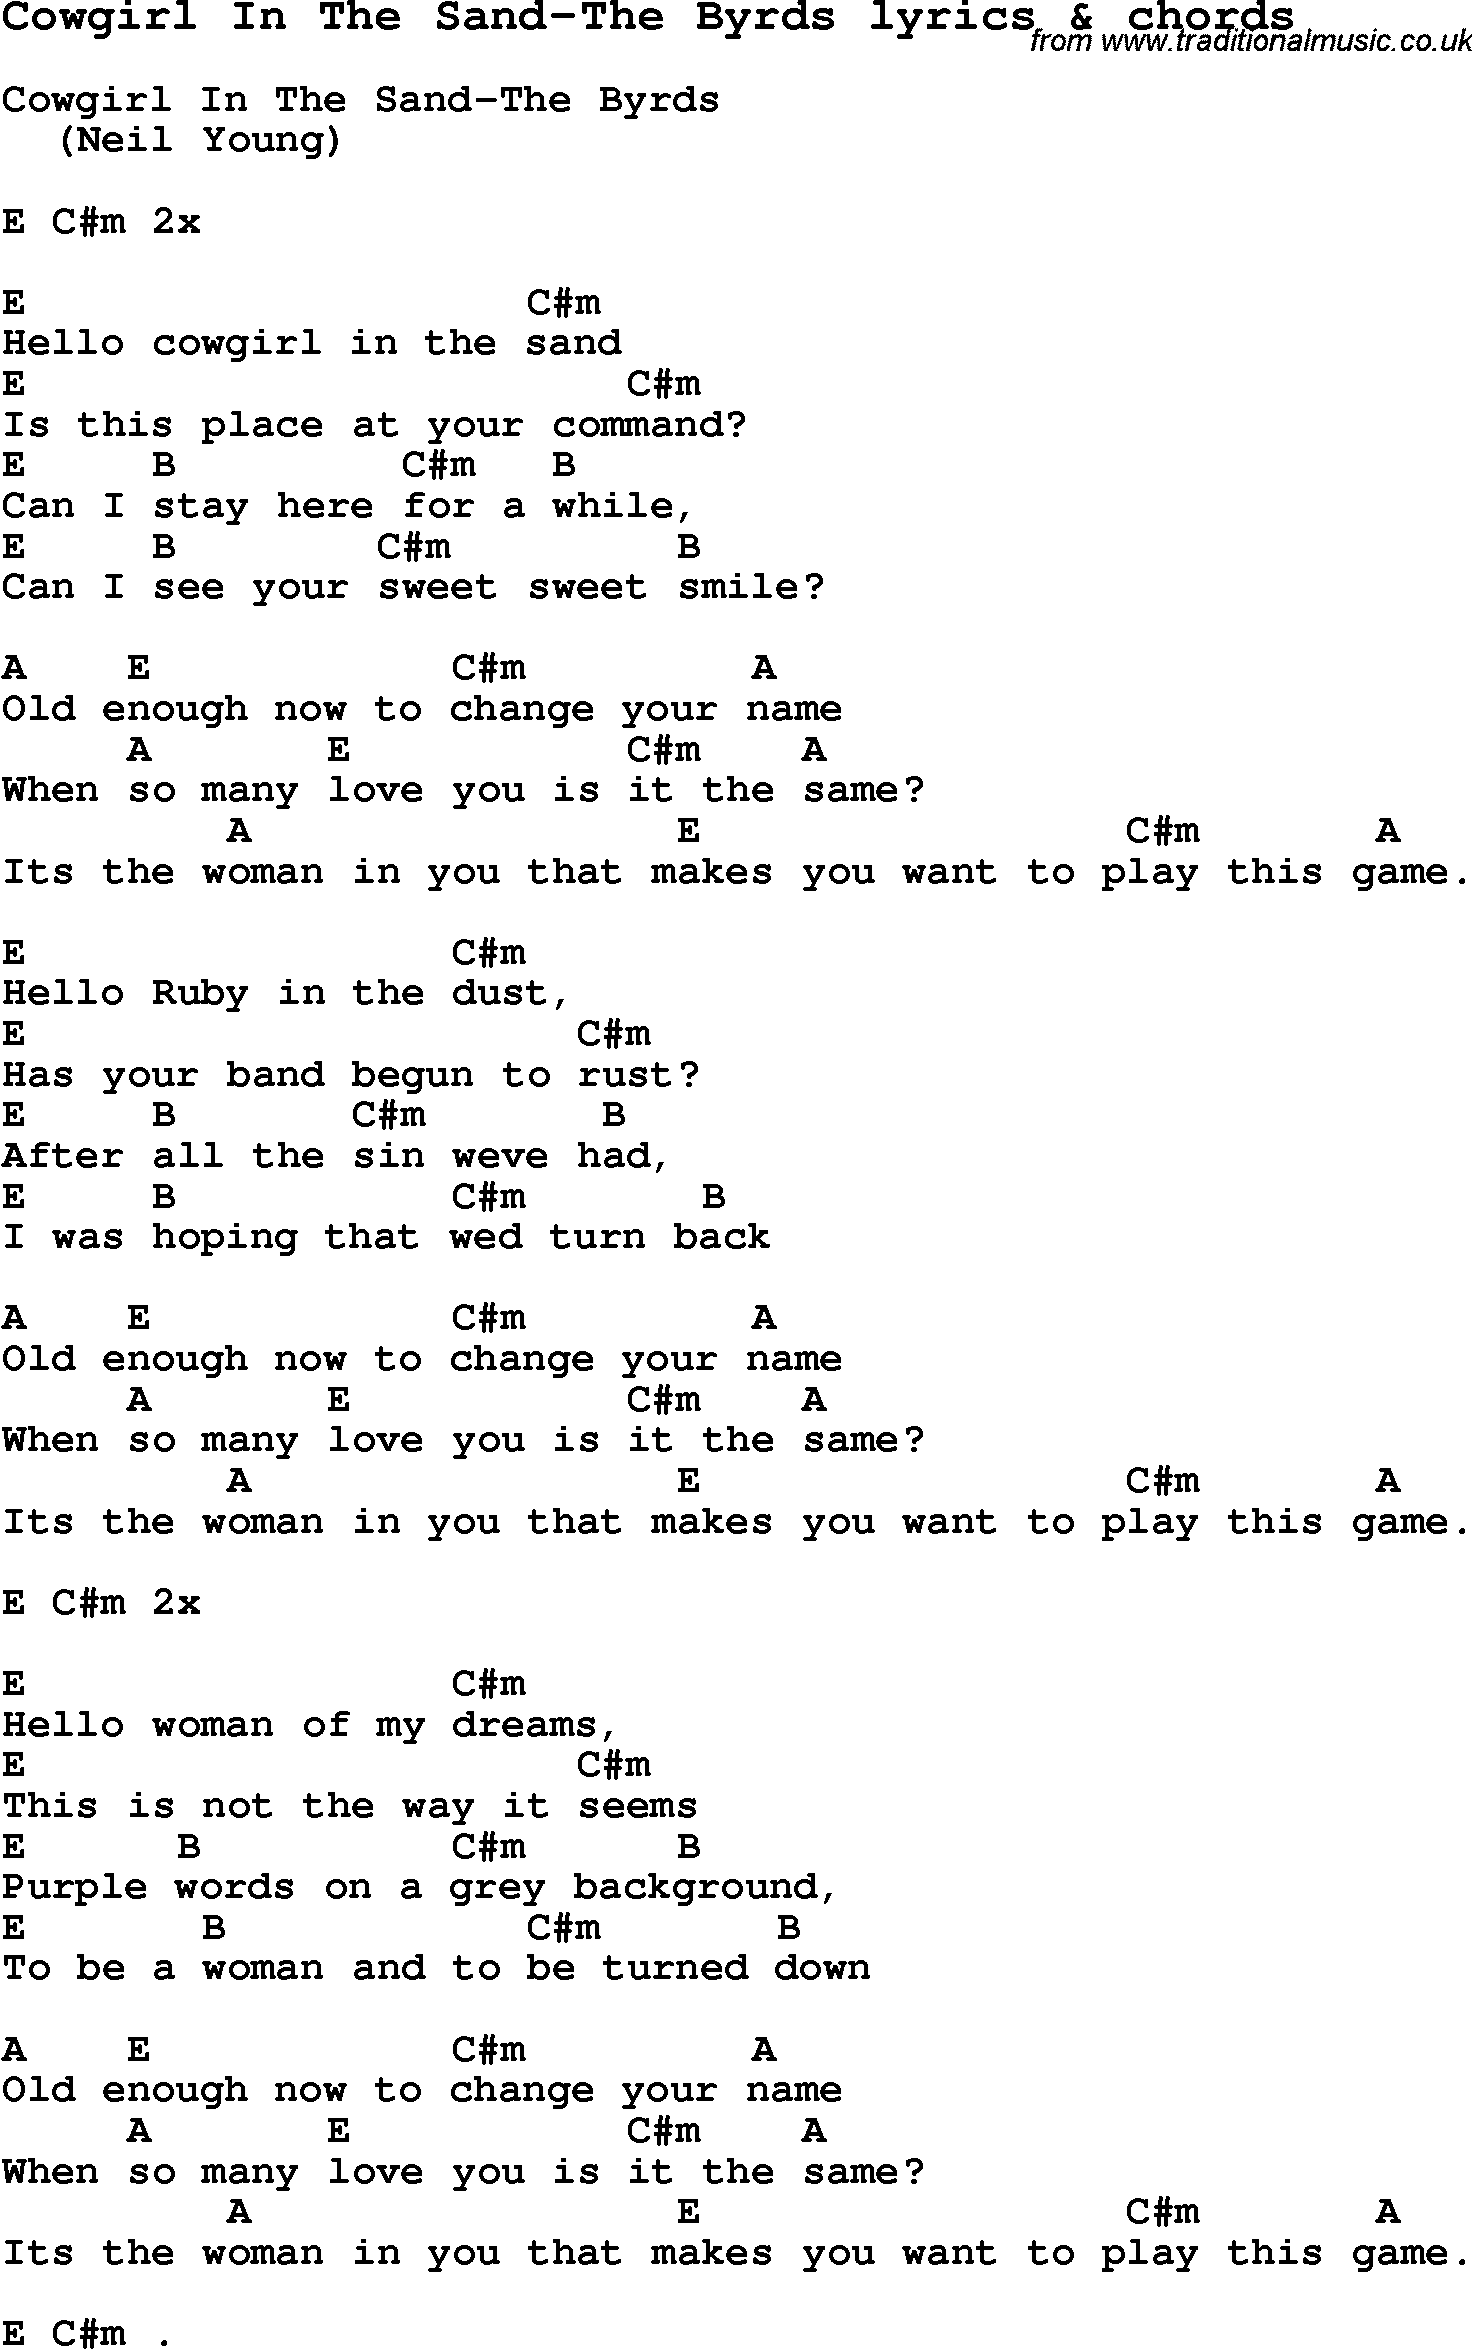 Love Song Lyrics for: Cowgirl In The Sand-The Byrds with chords for Ukulele, Guitar Banjo etc.